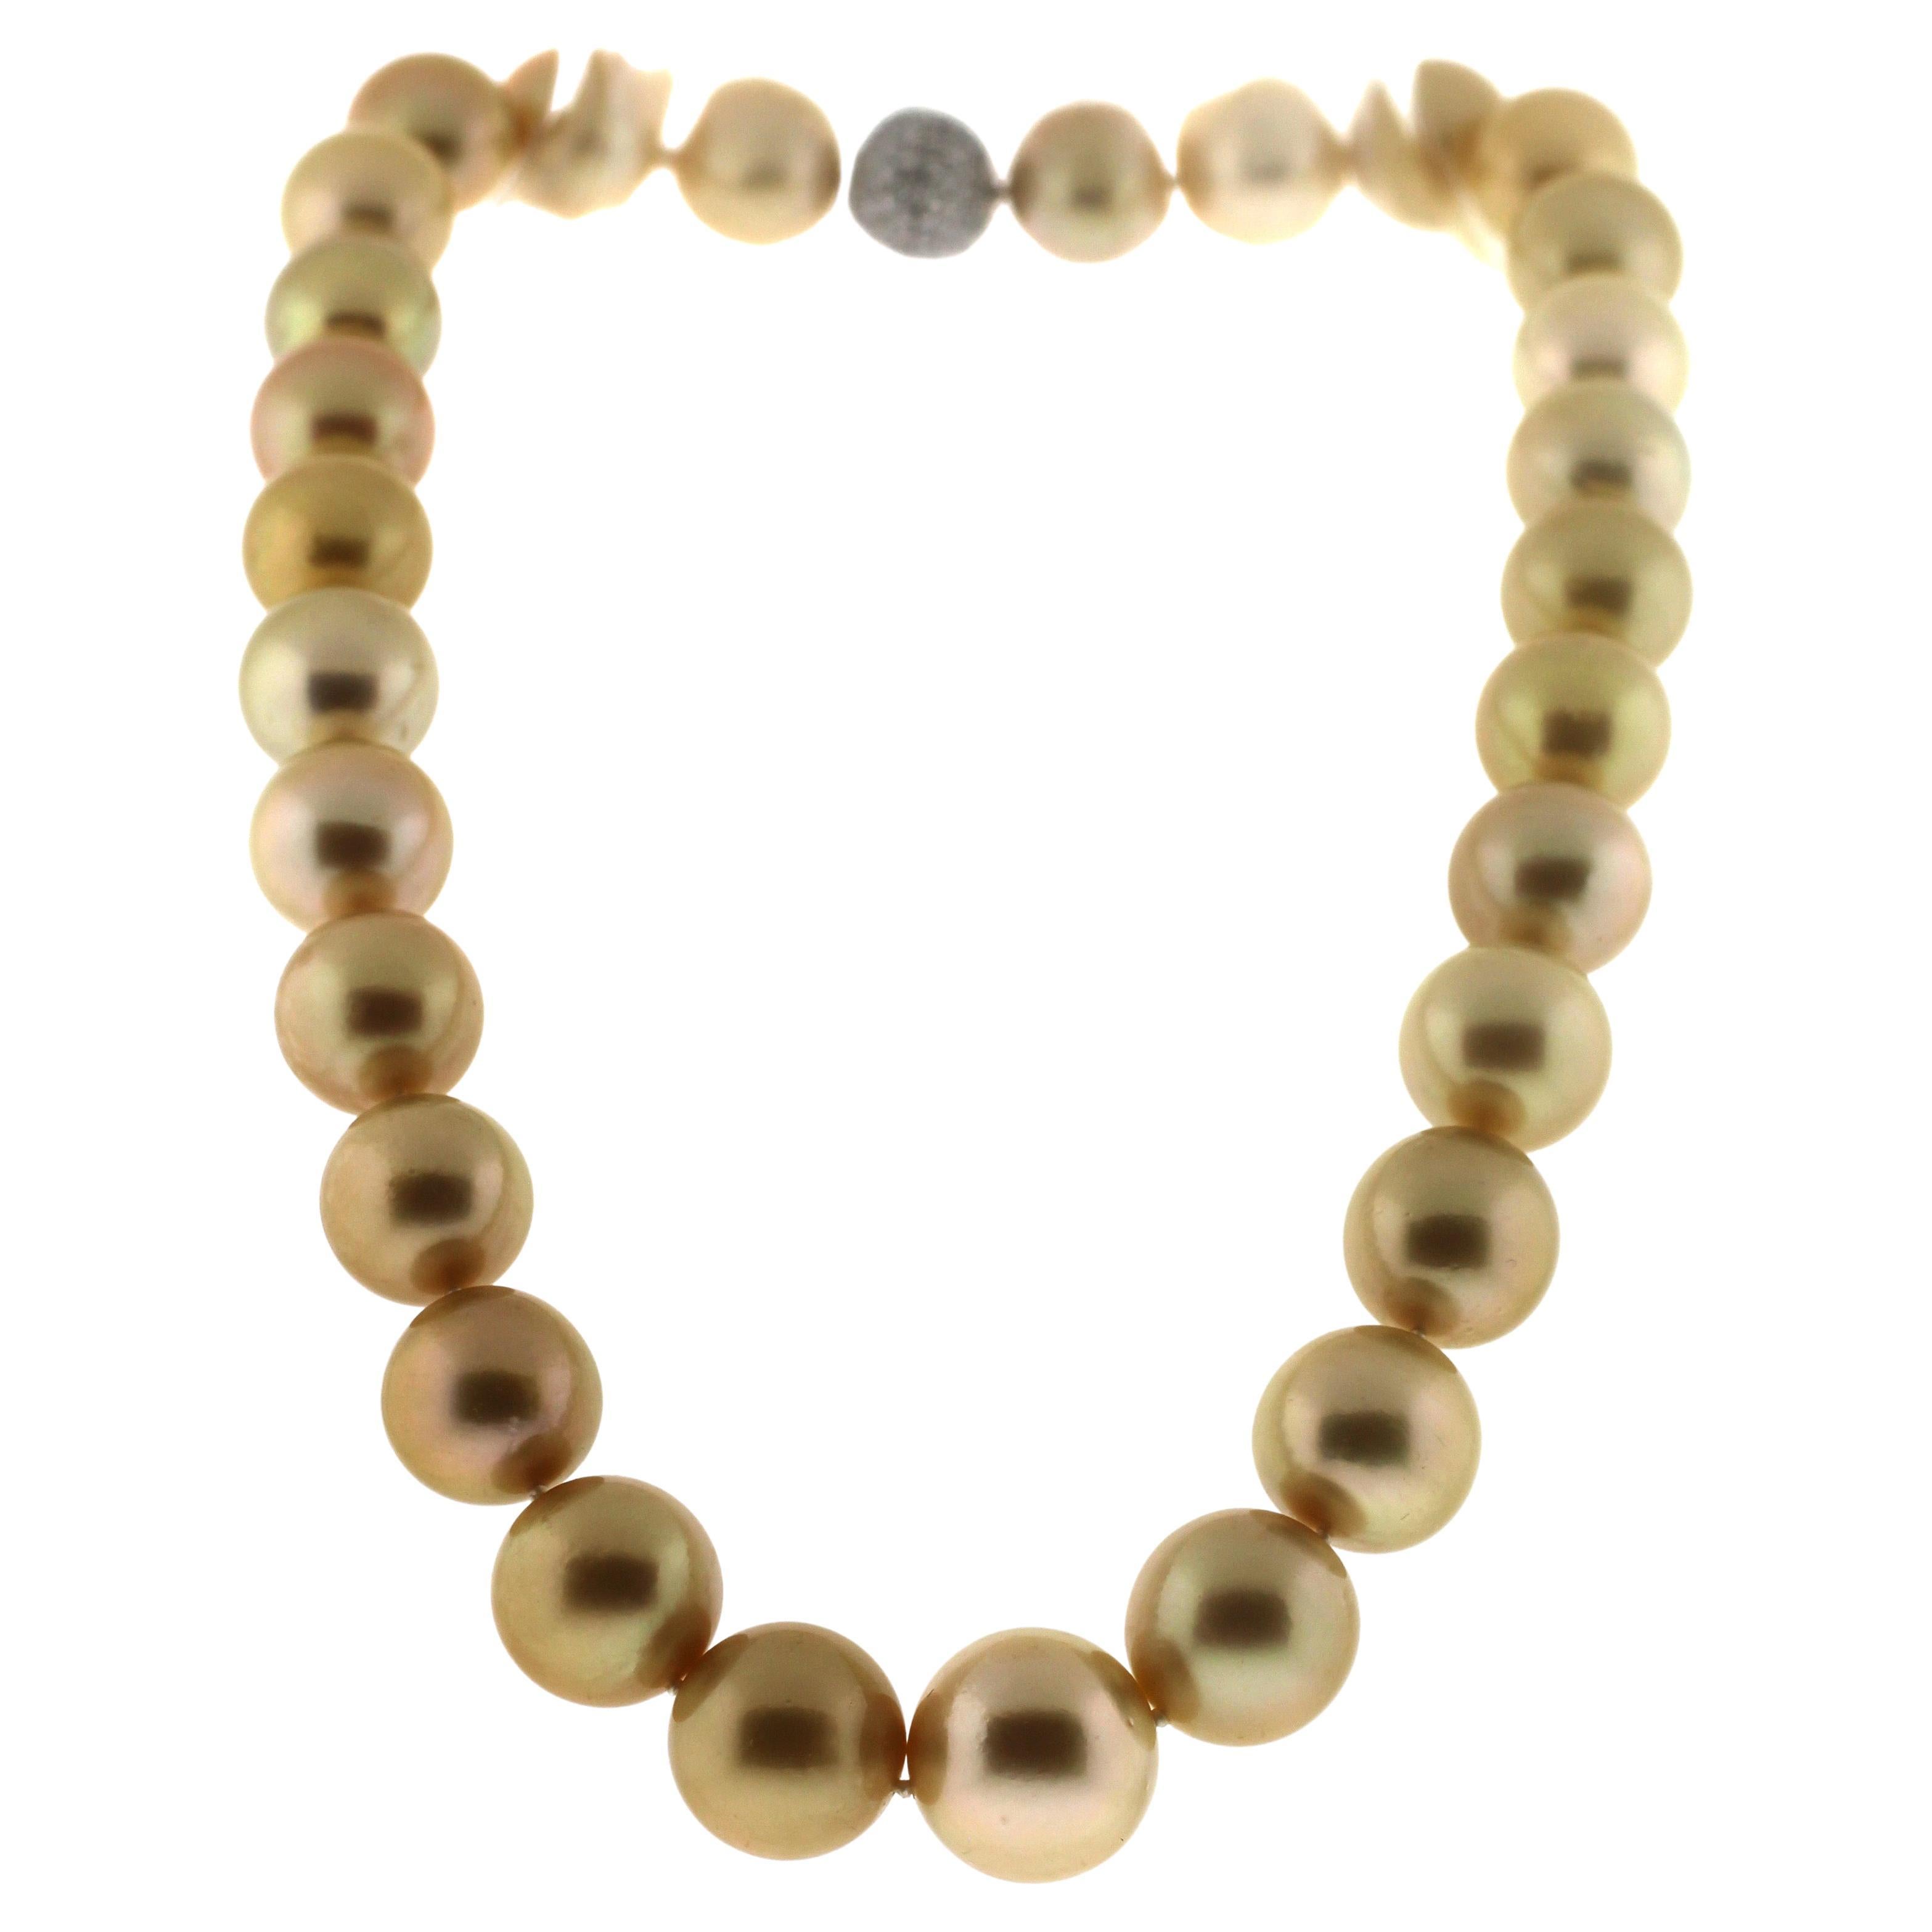 Hakimoto By Jewel Of Ocean 18K Golden South Sea Strand Necklace
18K White Gold Full Diamond Ball Clasp 
Weight (g): 115
Cultured South Sea Pearl 
Pearl Size: 13X16mm 
Pearl Shape: Round 
Body color: Natural Golden
Orient: Very Good
Luster: Very Good